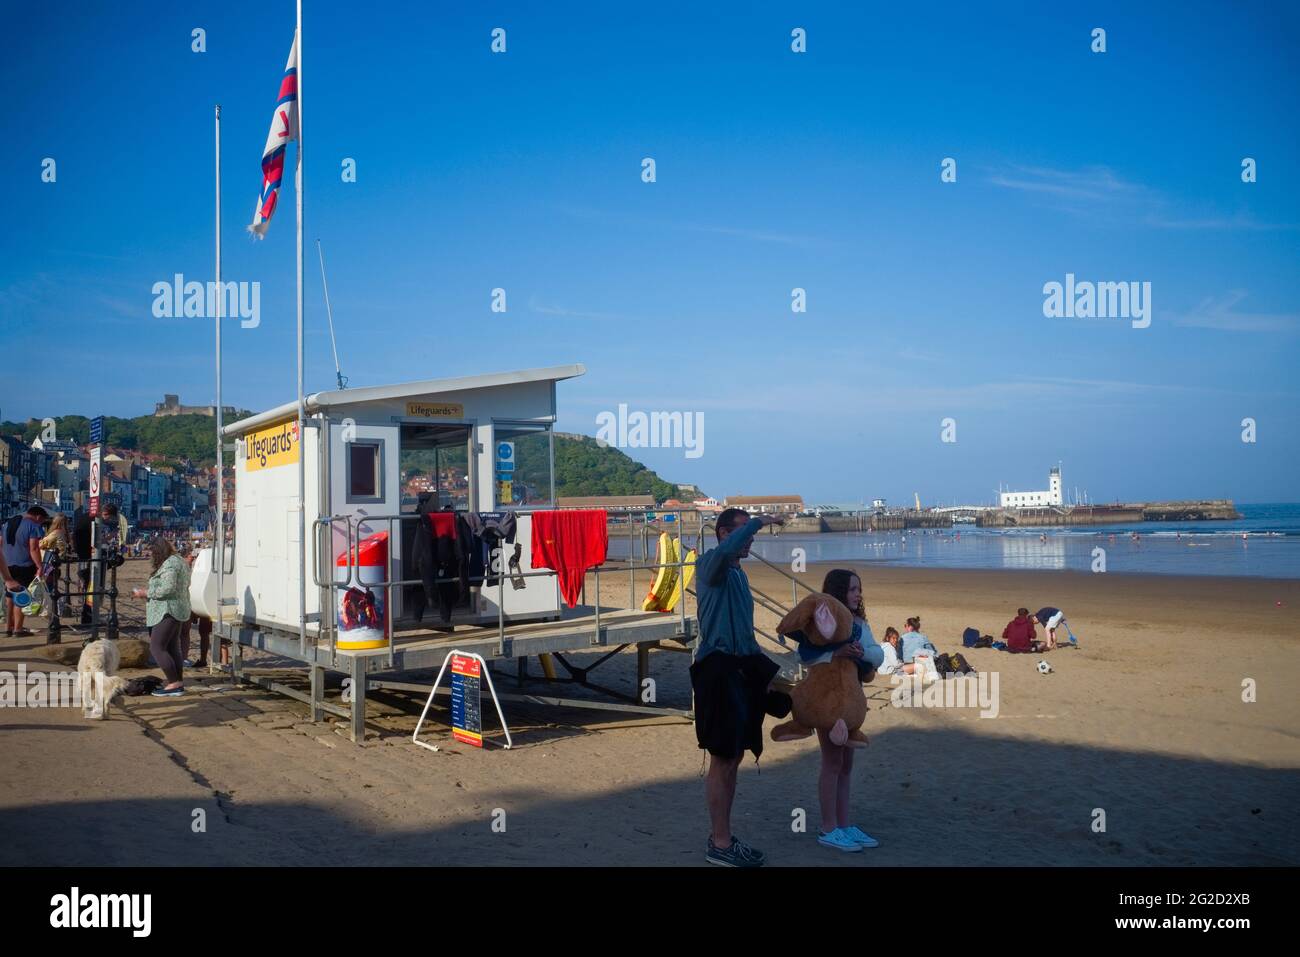 The lifeguards station at Scarborough beach Stock Photo